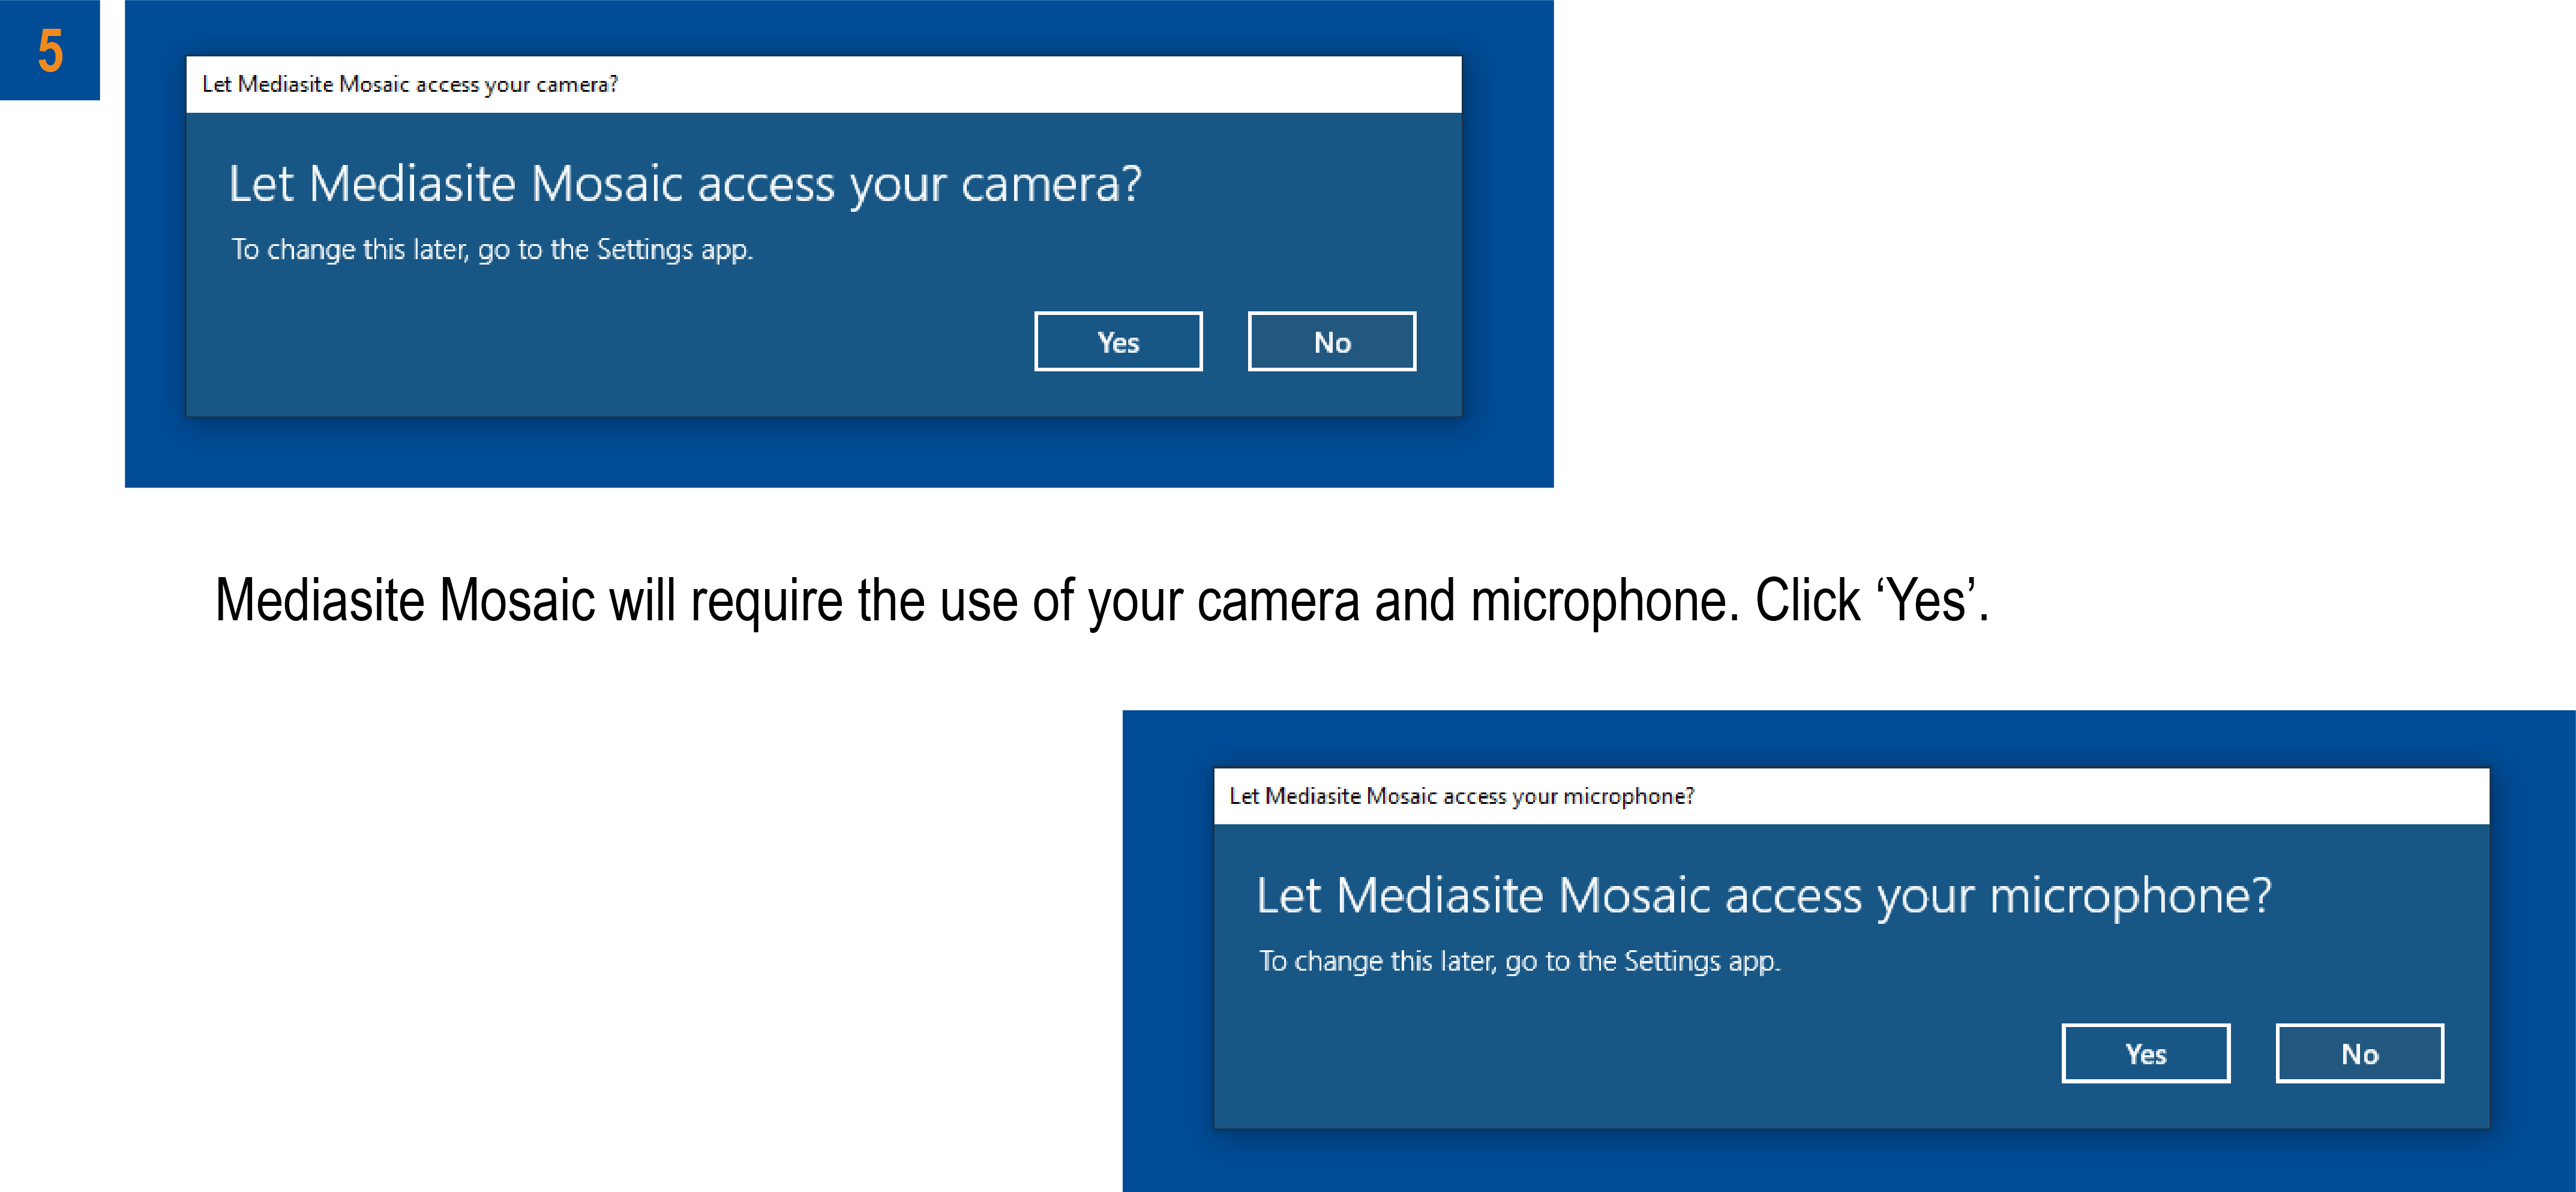 Mediasite Mosaic will require the use of your camera and microphone. Click yes.